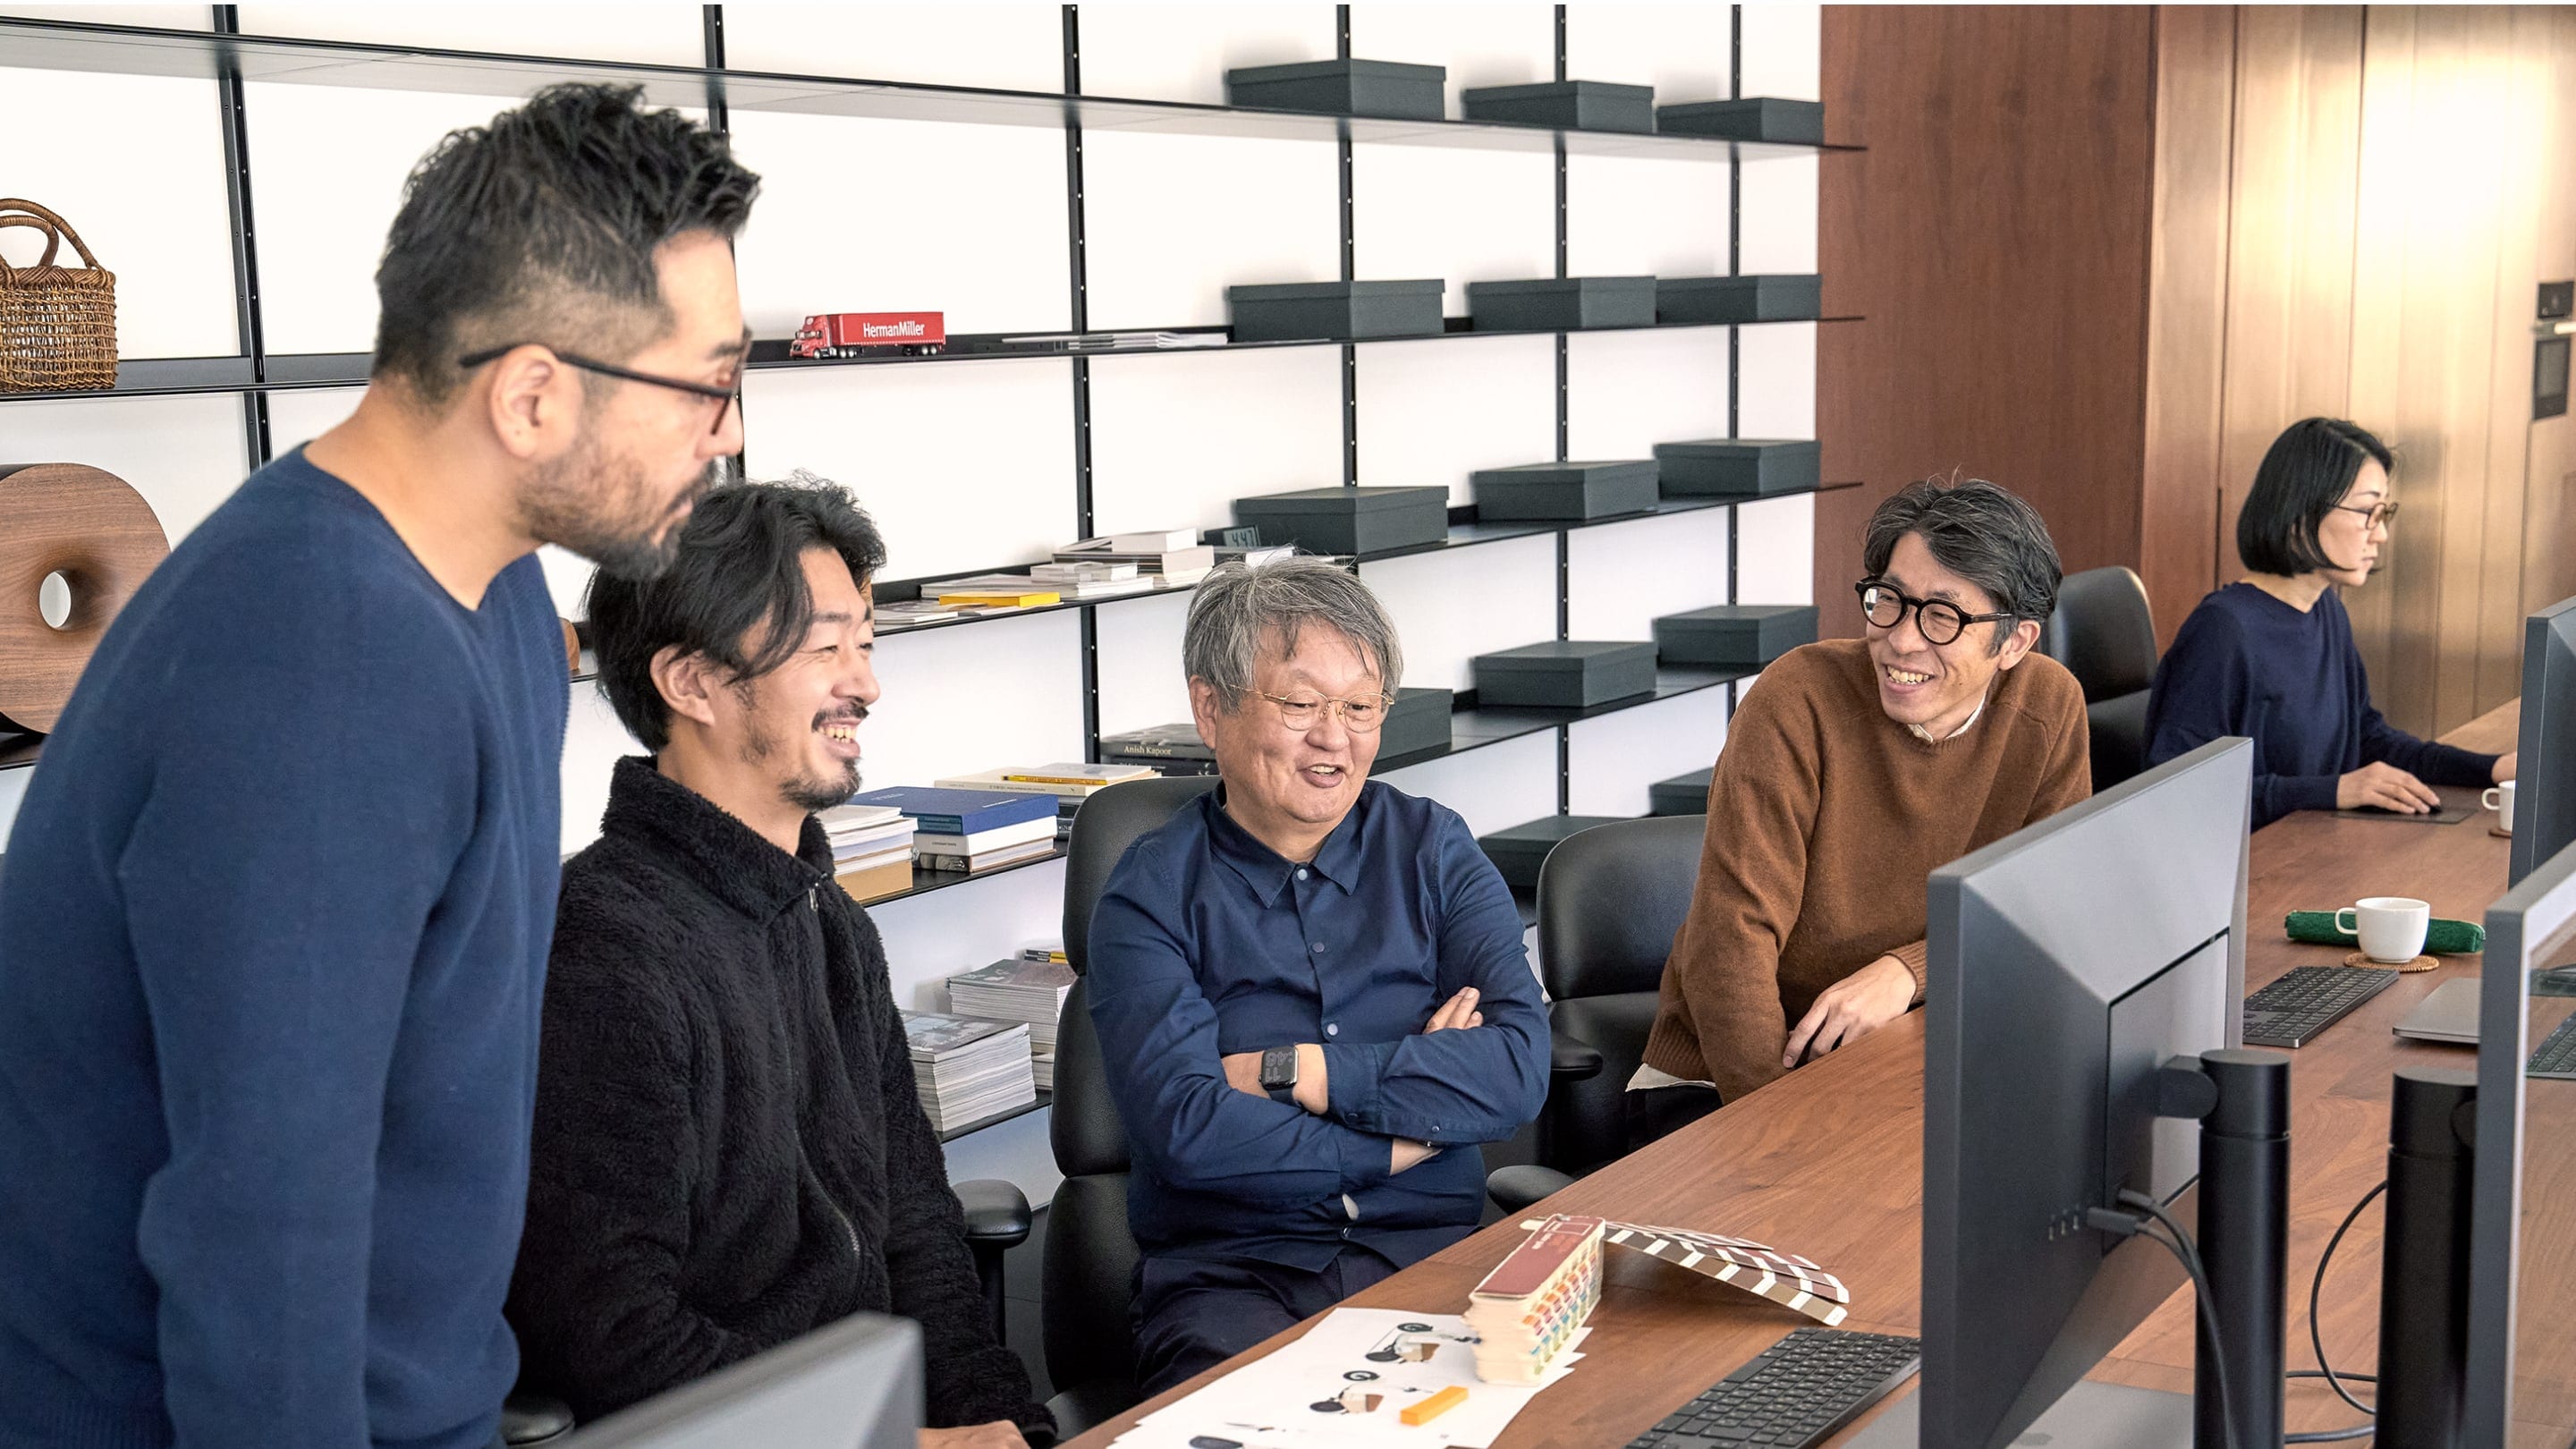 Naoto Fukasawa sits in the center of a group of five designers at a long wooden desk, with a minimal black shelf behind them featuring wooden sculptures, various ephemera, and black file boxes. In front of them are a Pantone swatch deck and computer monitors.